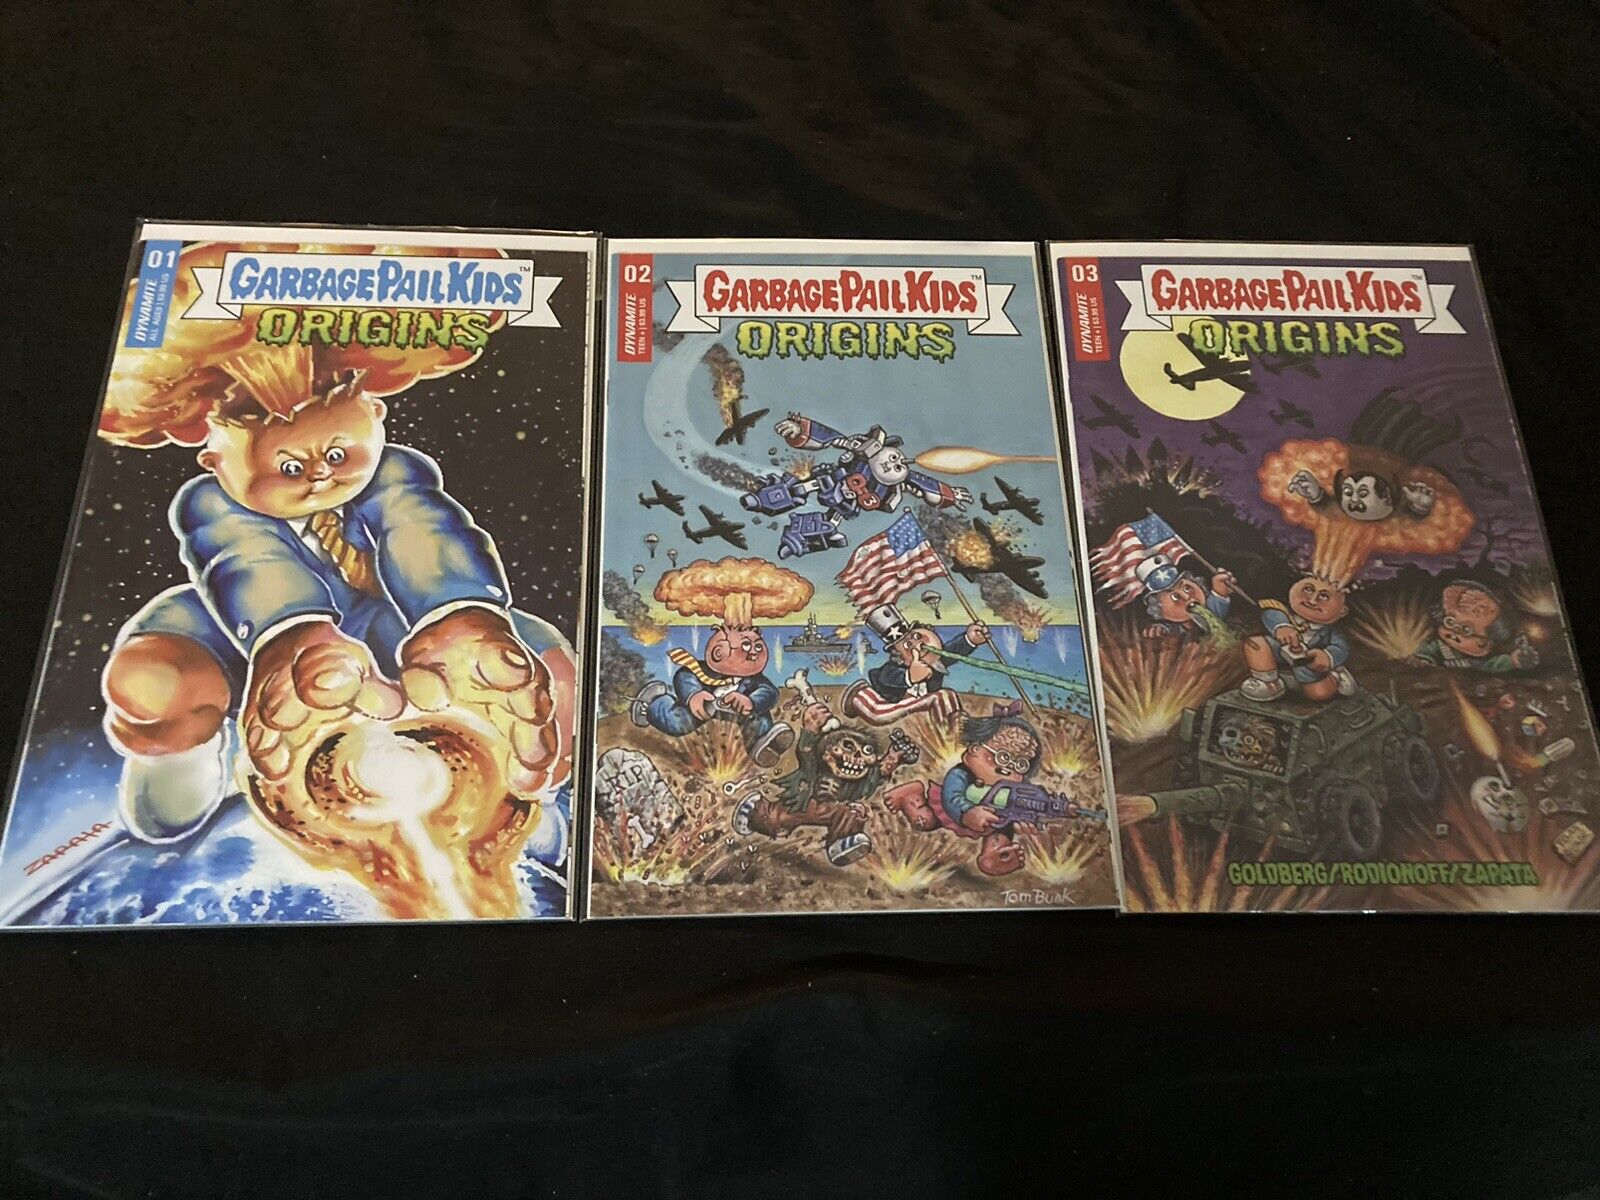 Garbage Pail Kids And Origins Lot Of Issues 1,2,3 Gpk Dynamite Comics